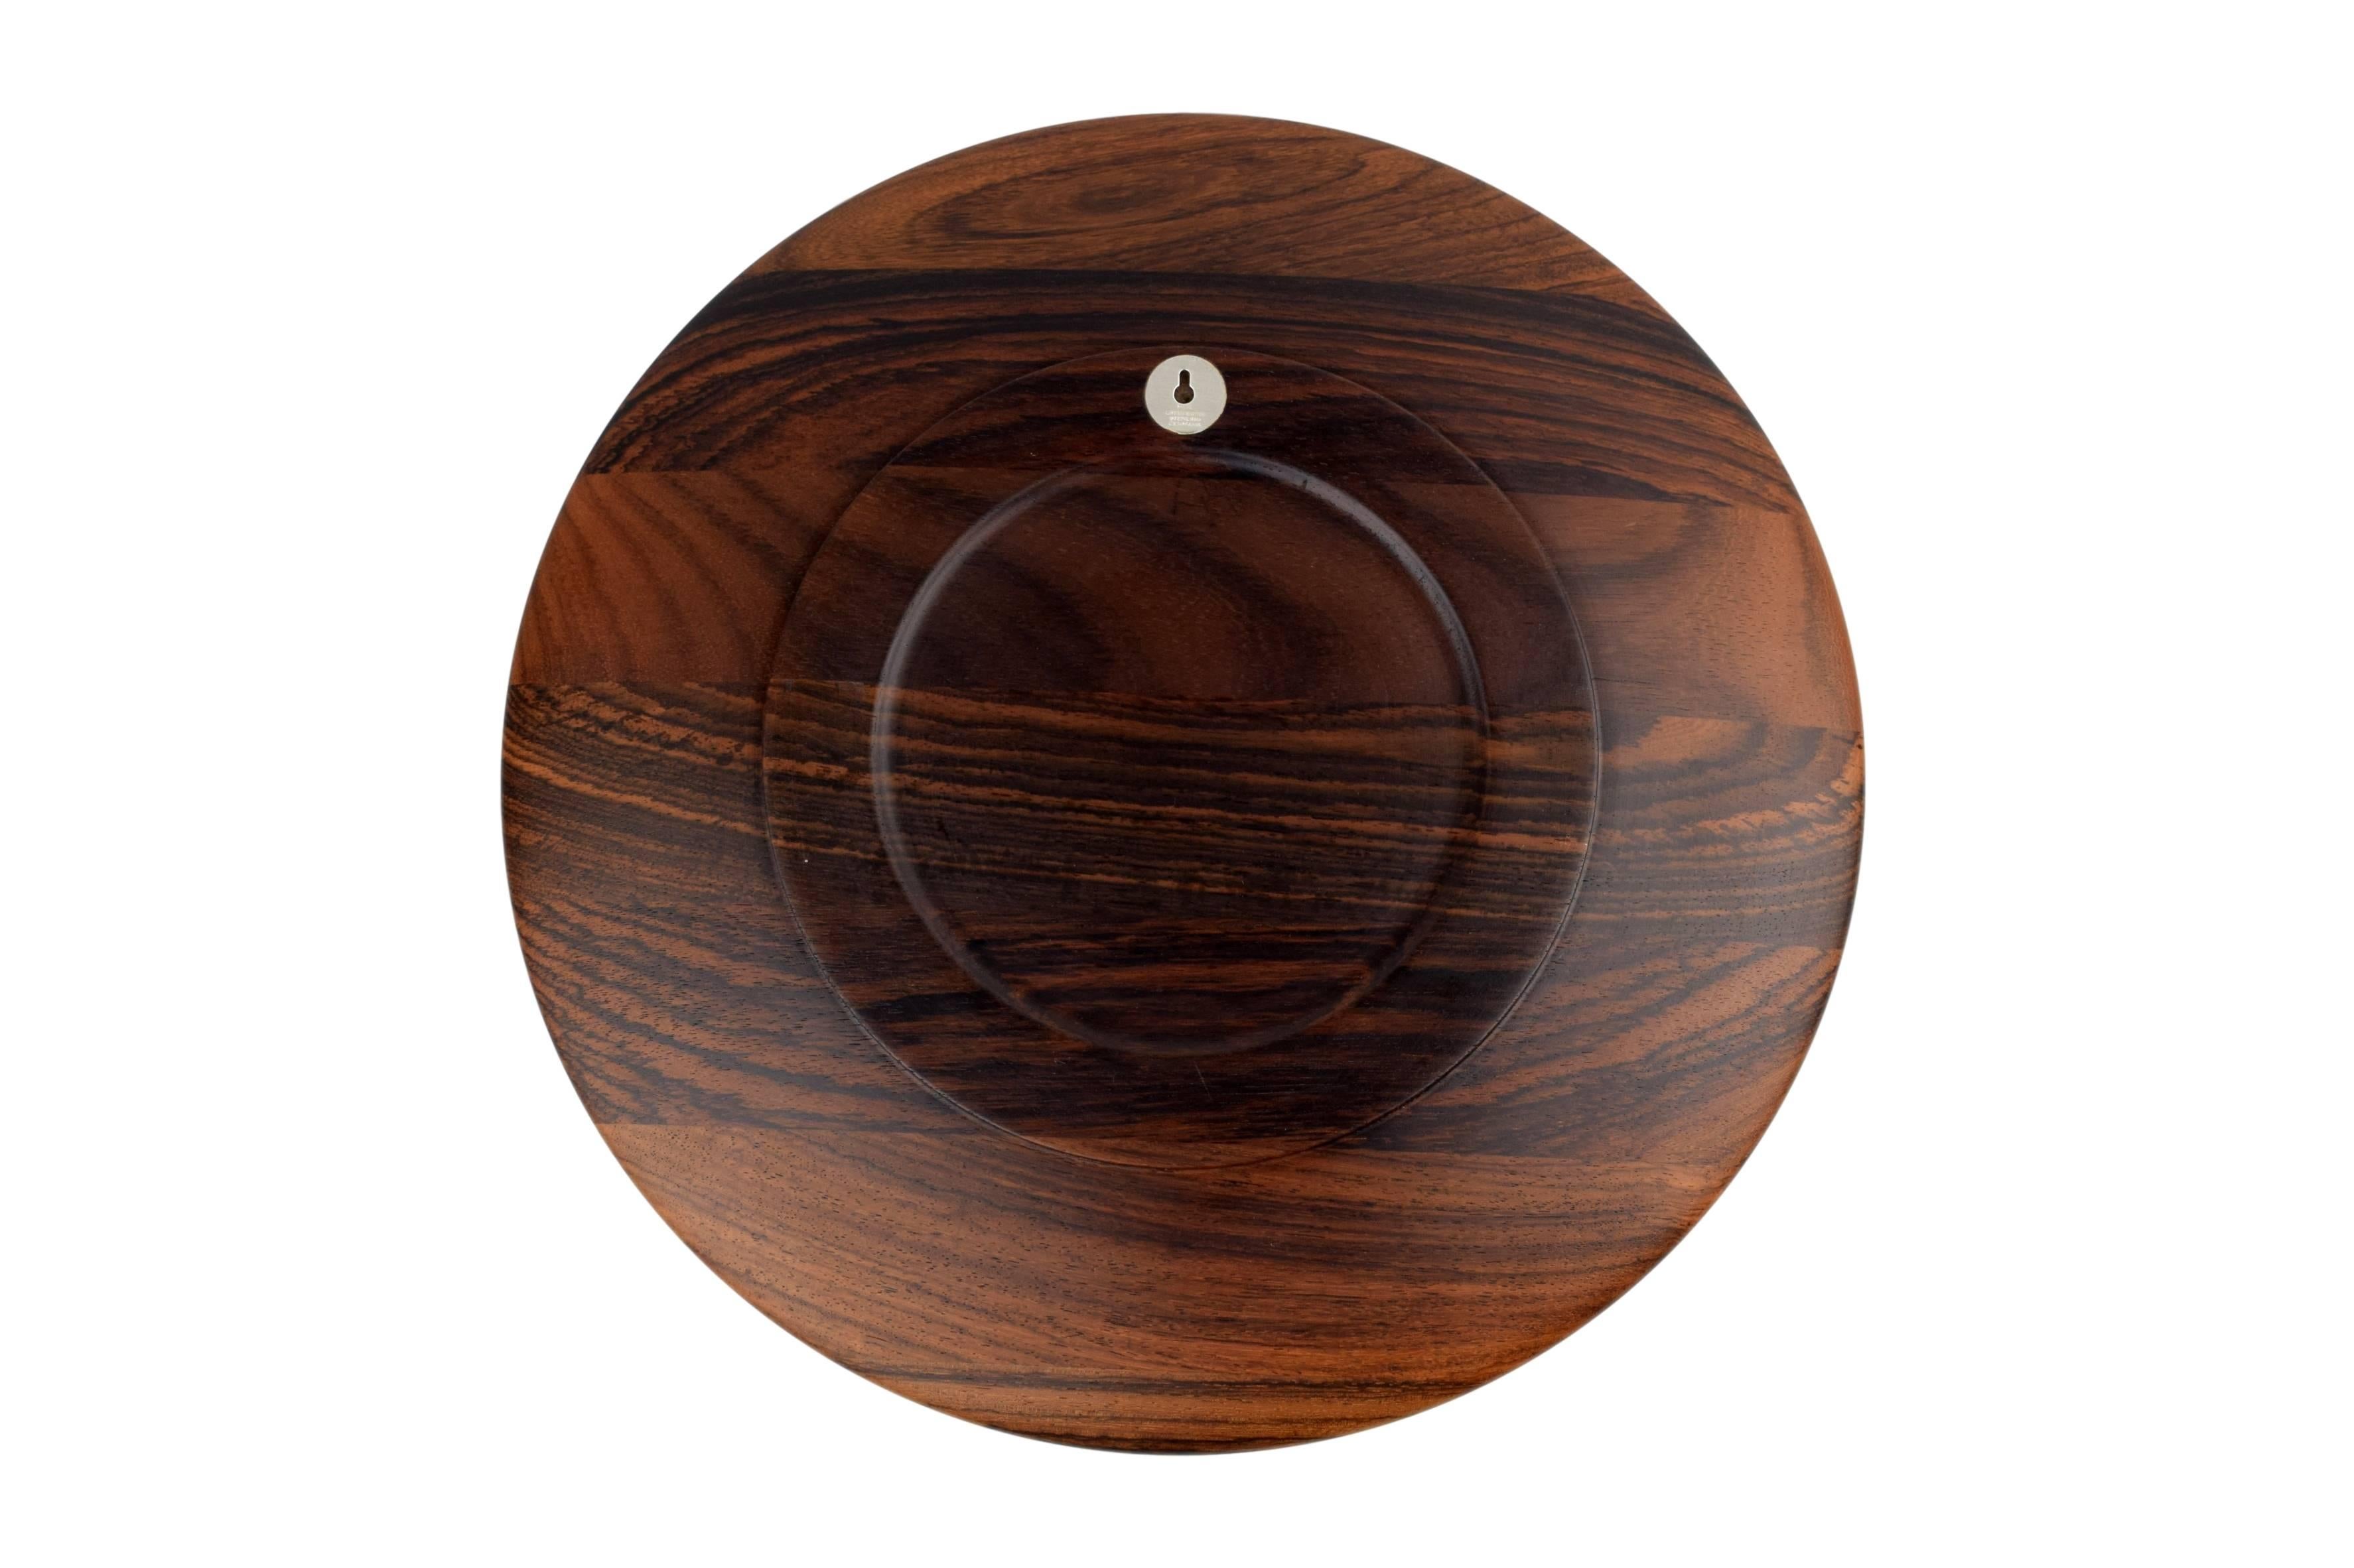 A Danish midcentury rosewood plate or wall platter with sterling silver inlays depicting a greenlandic motive. Design by Robert Dalgas Lassen.

These platters were made in a limited edition. The platters were produced in Denmark from 1970-1989.